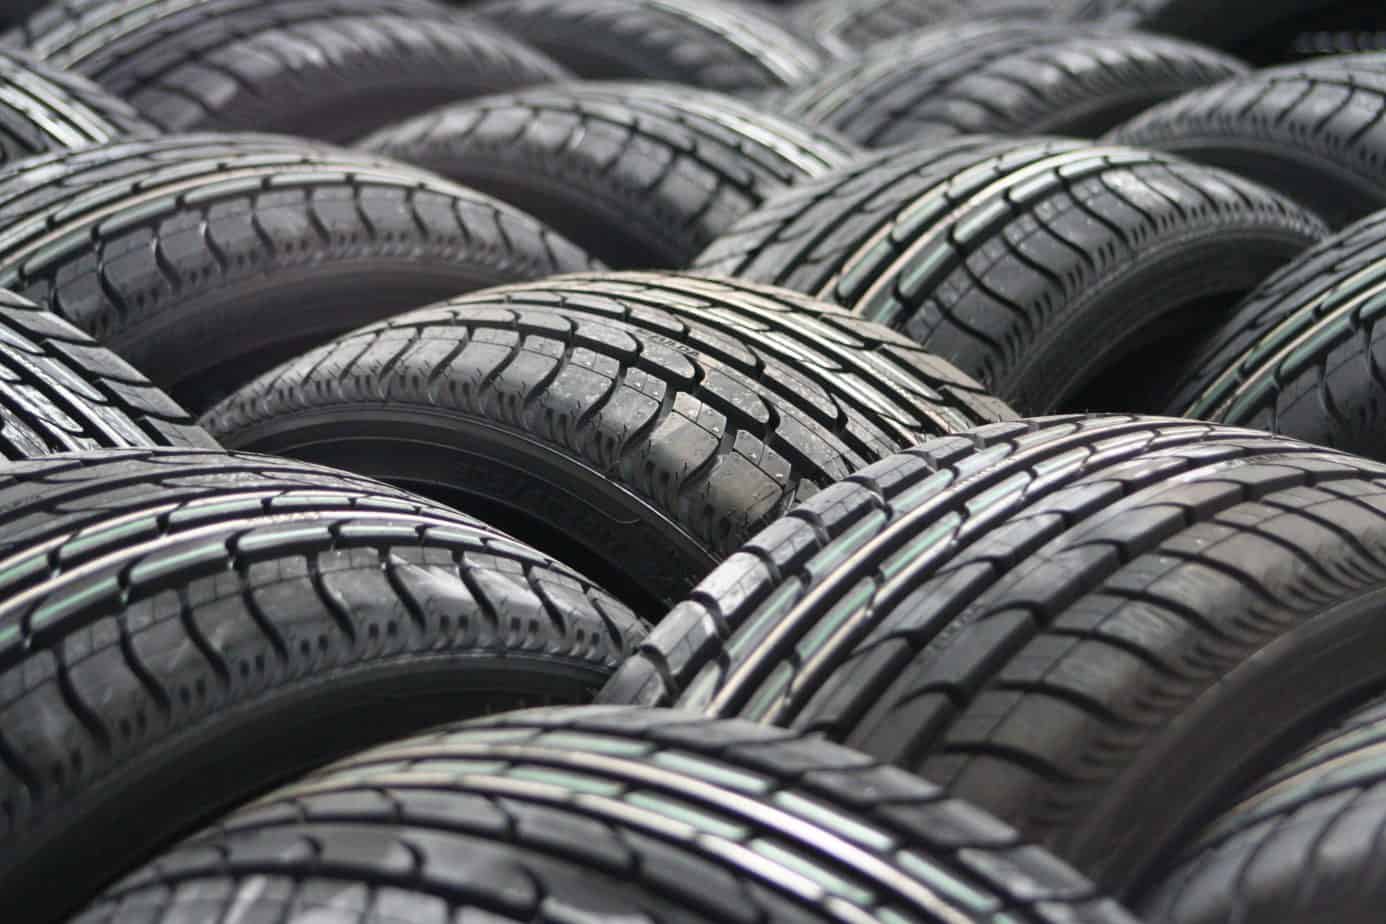 When should you invest in new tires? Here are the golden rules